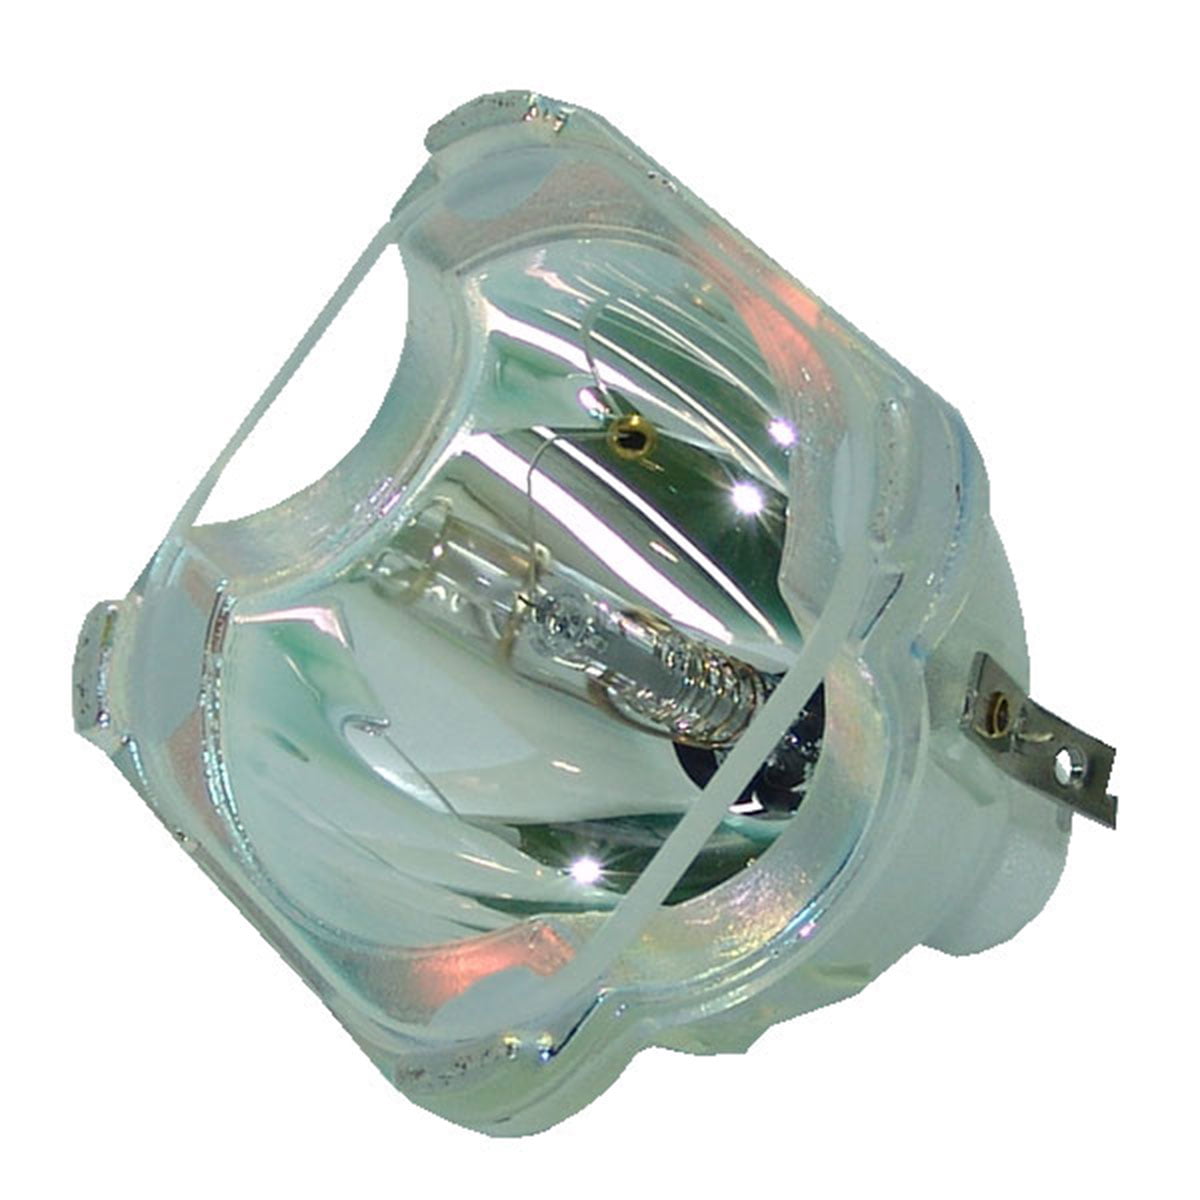 Original 915B441001 Replacement TV Lamp with Housing for Mitsubishi WD-65738 WD-65C10 WD-65838 Powered by Osram WD-73C10 